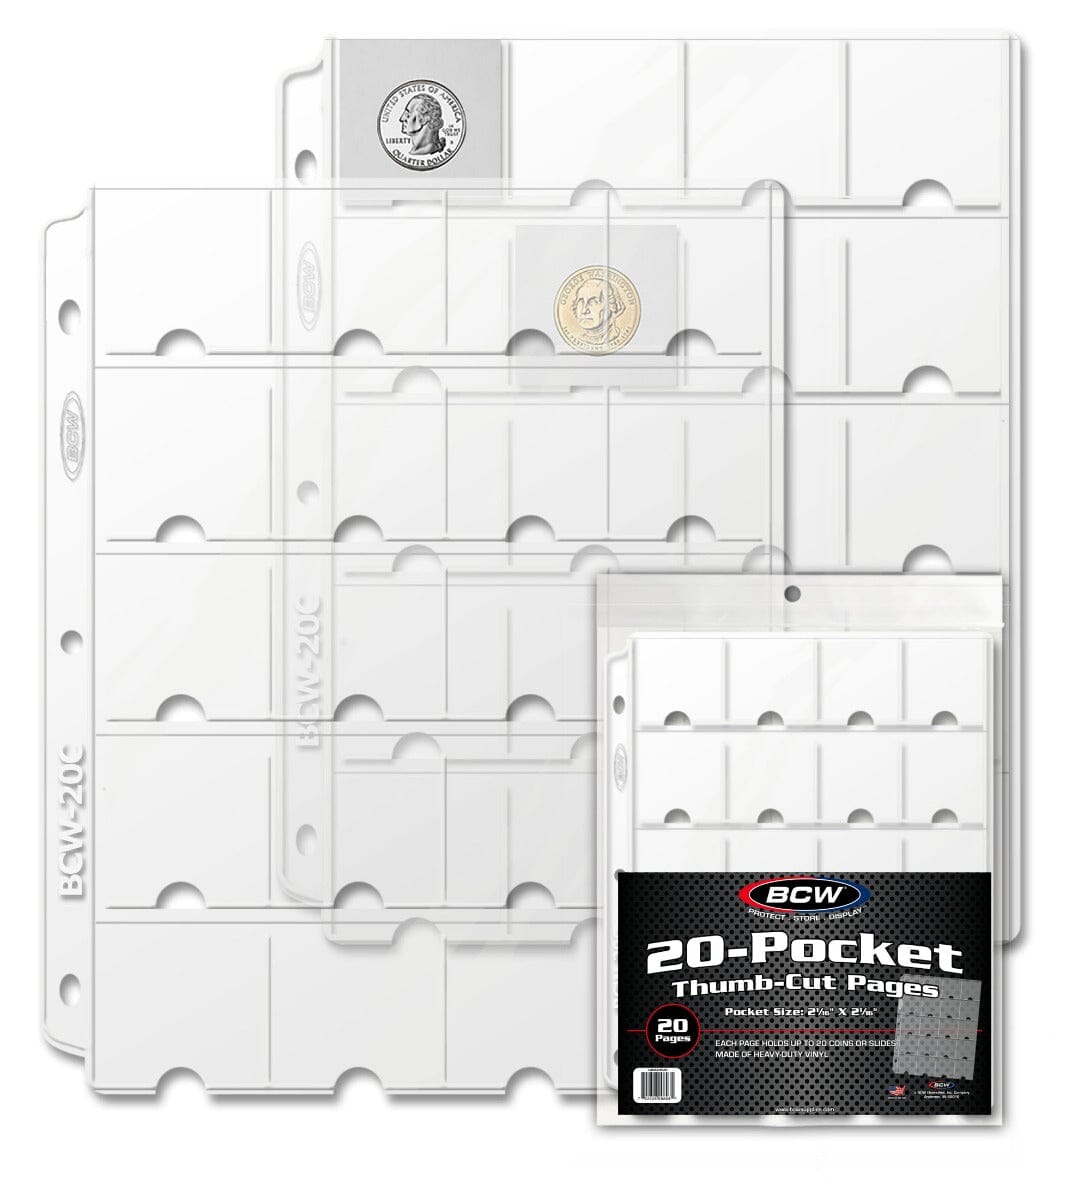 Plastic 20-Pocket Coin Collectors Album Page with Thumb Cut